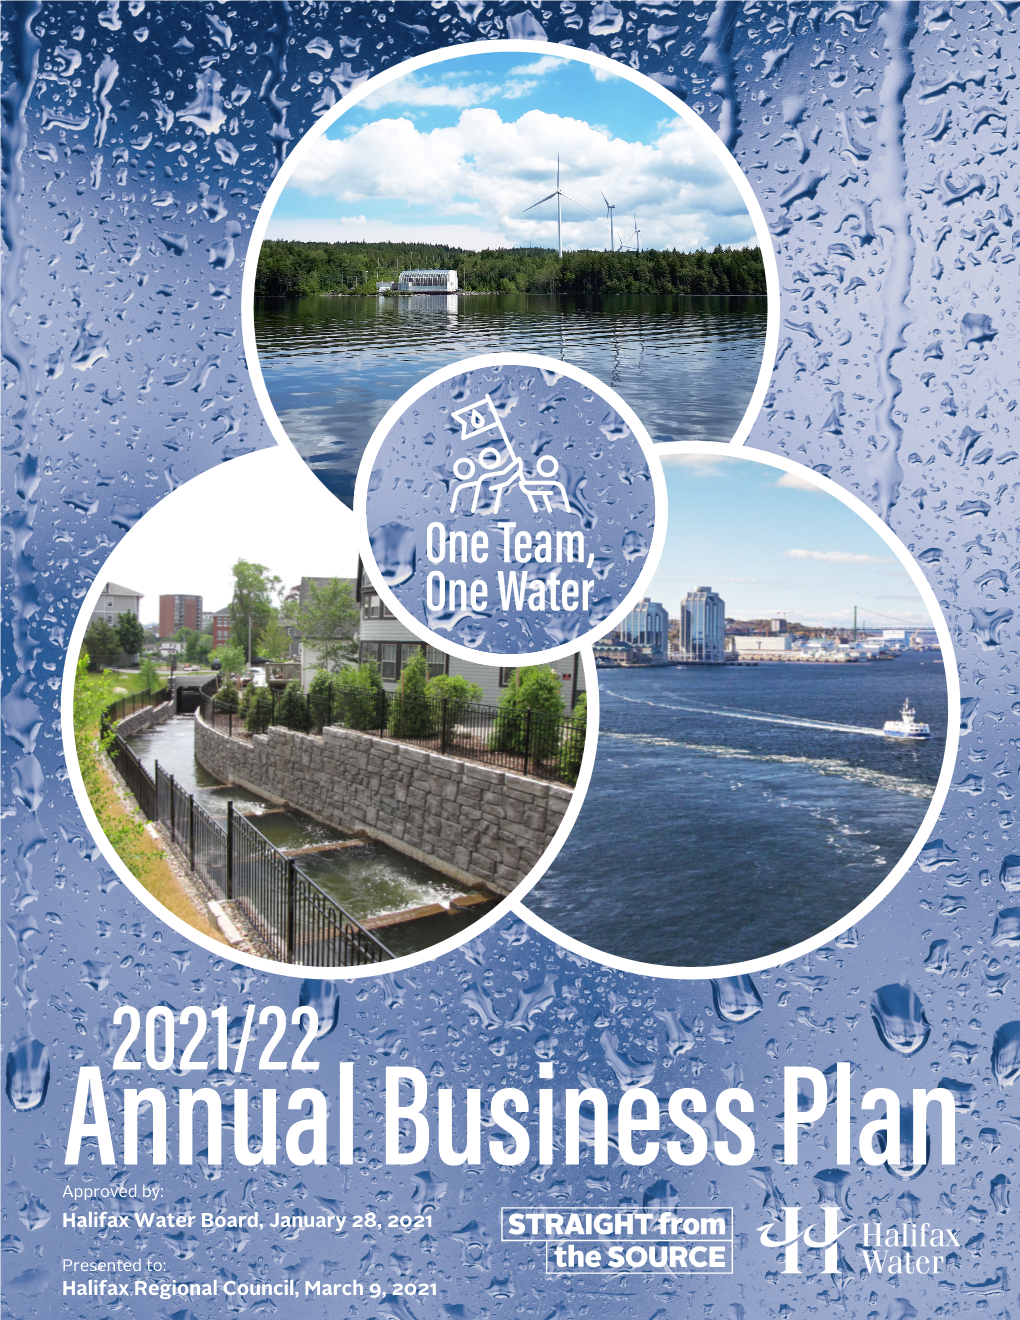 Annual Business Plan 2021/22